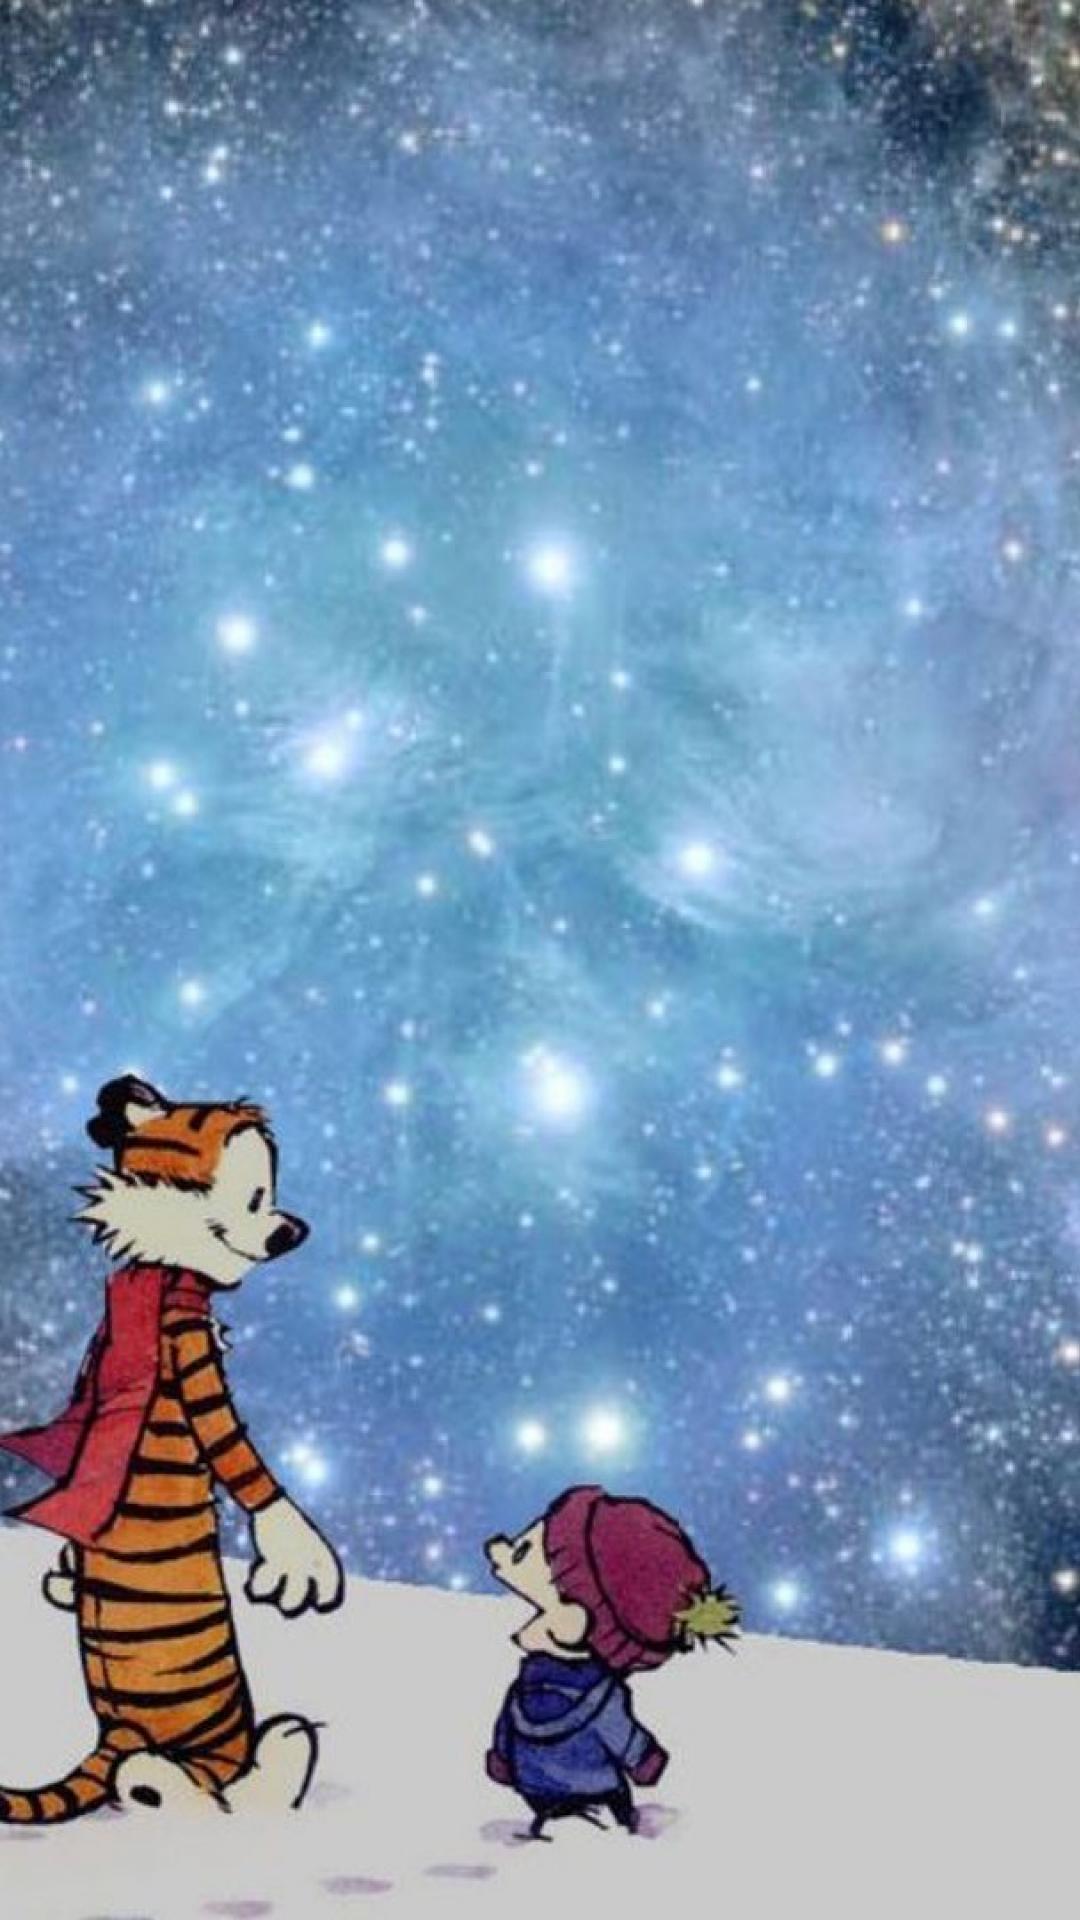 phone wallapers dump all credit goes to yuikol14   Calvin and hobbes  wallpaper Calvin and hobbes comics Calvin and hobbes